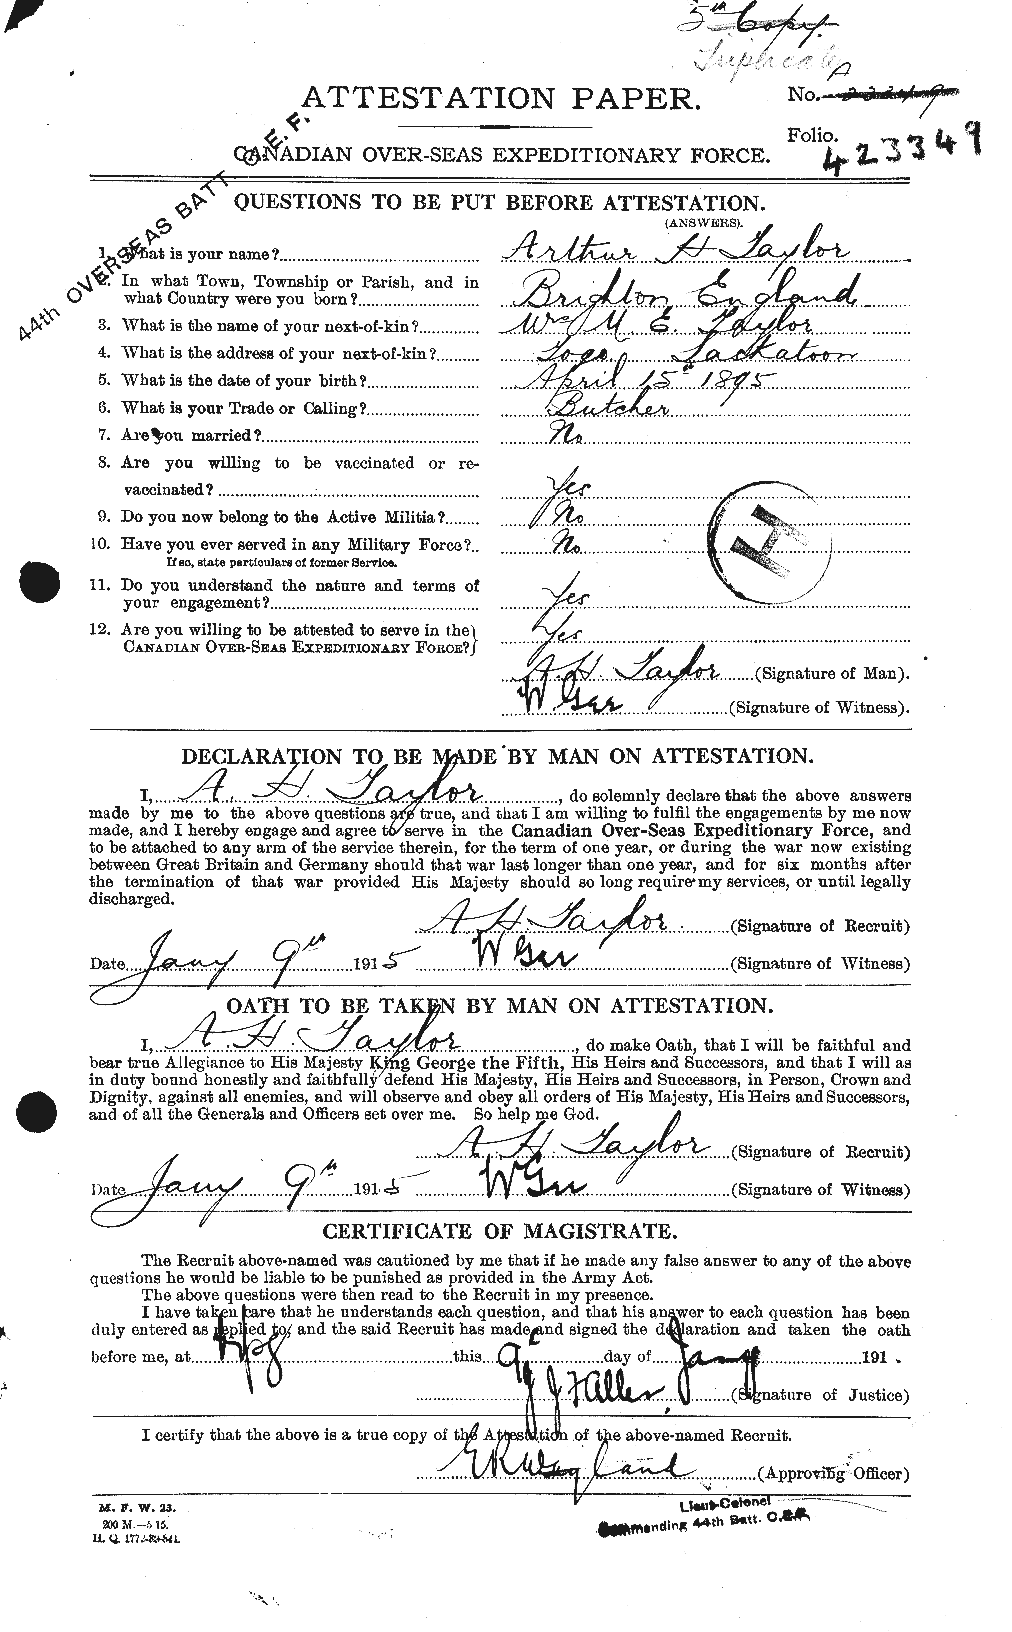 Personnel Records of the First World War - CEF 626726a